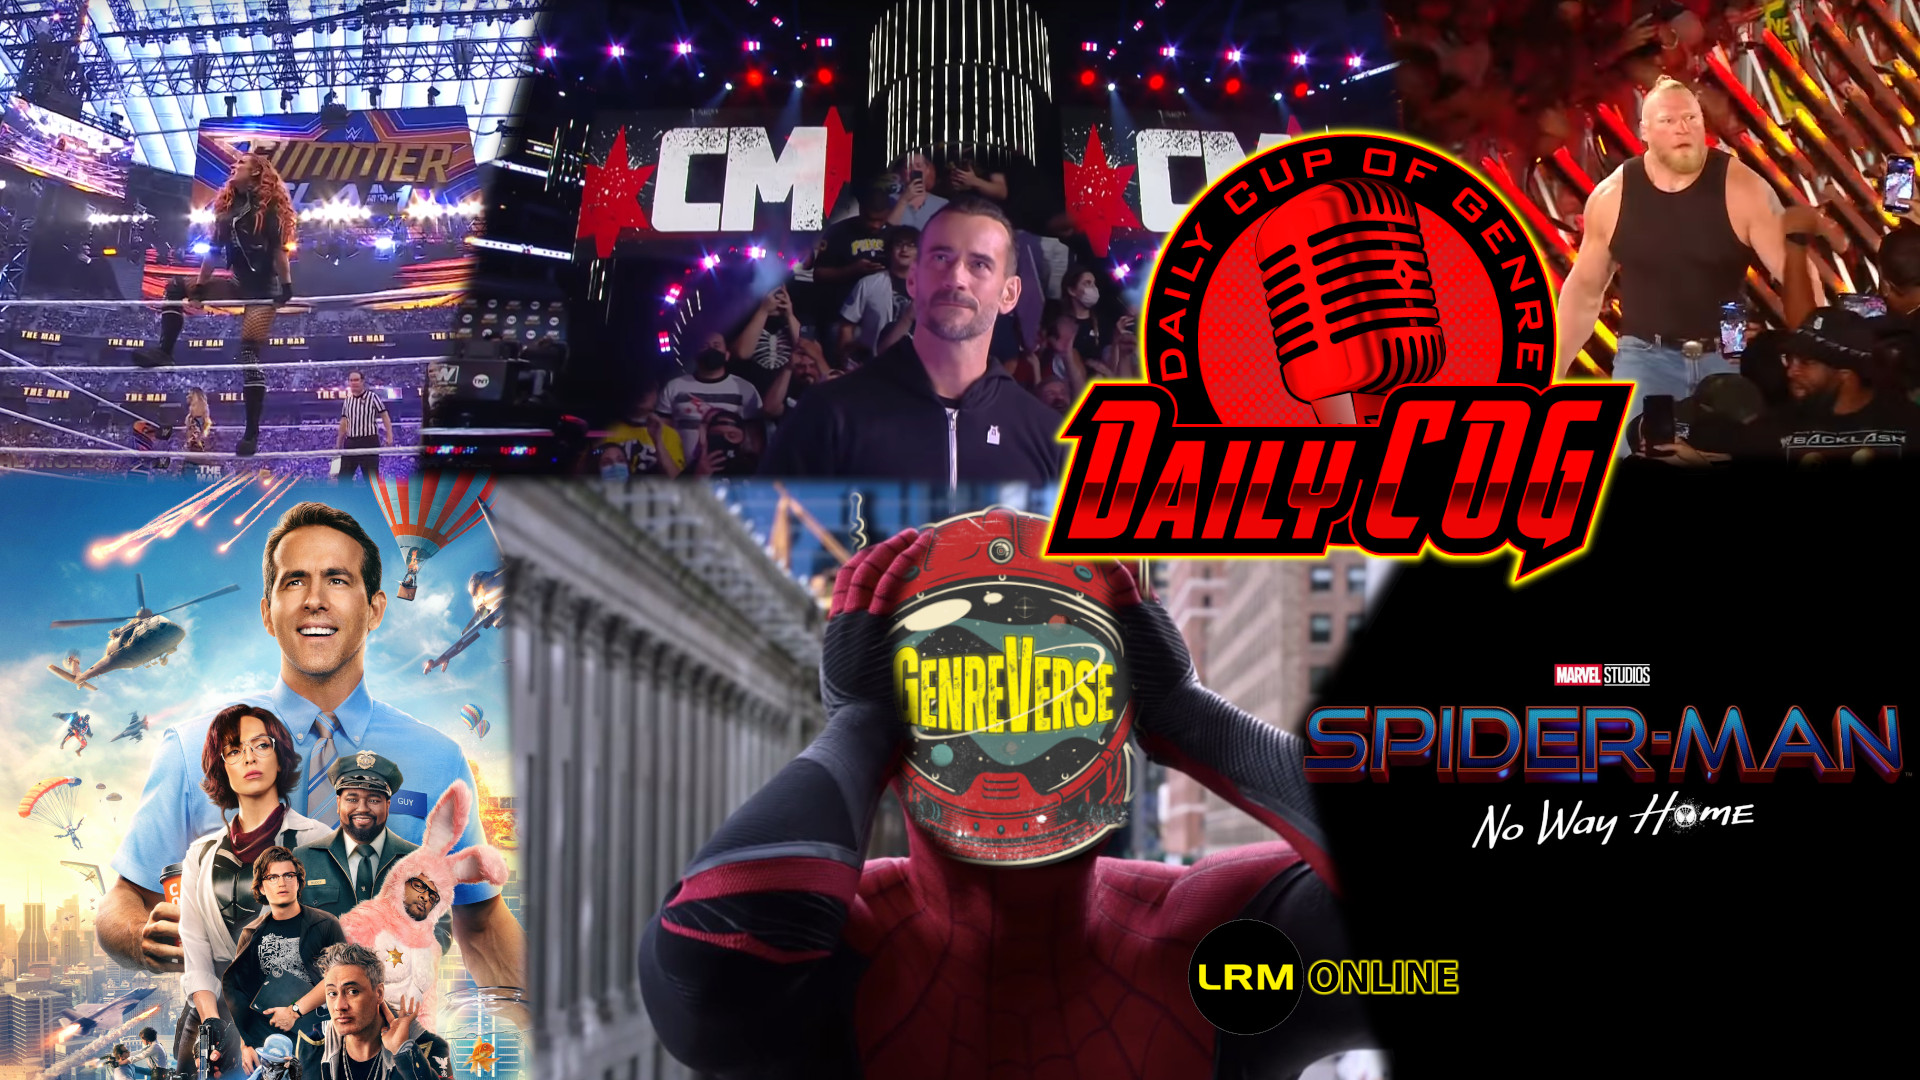 CM Punk Debuts On AEW & SummerSlam Moments, Free Guy Box Office Numbers Shock, And The Spider-Man: No Way Home Trailer Leaked | Daily COG